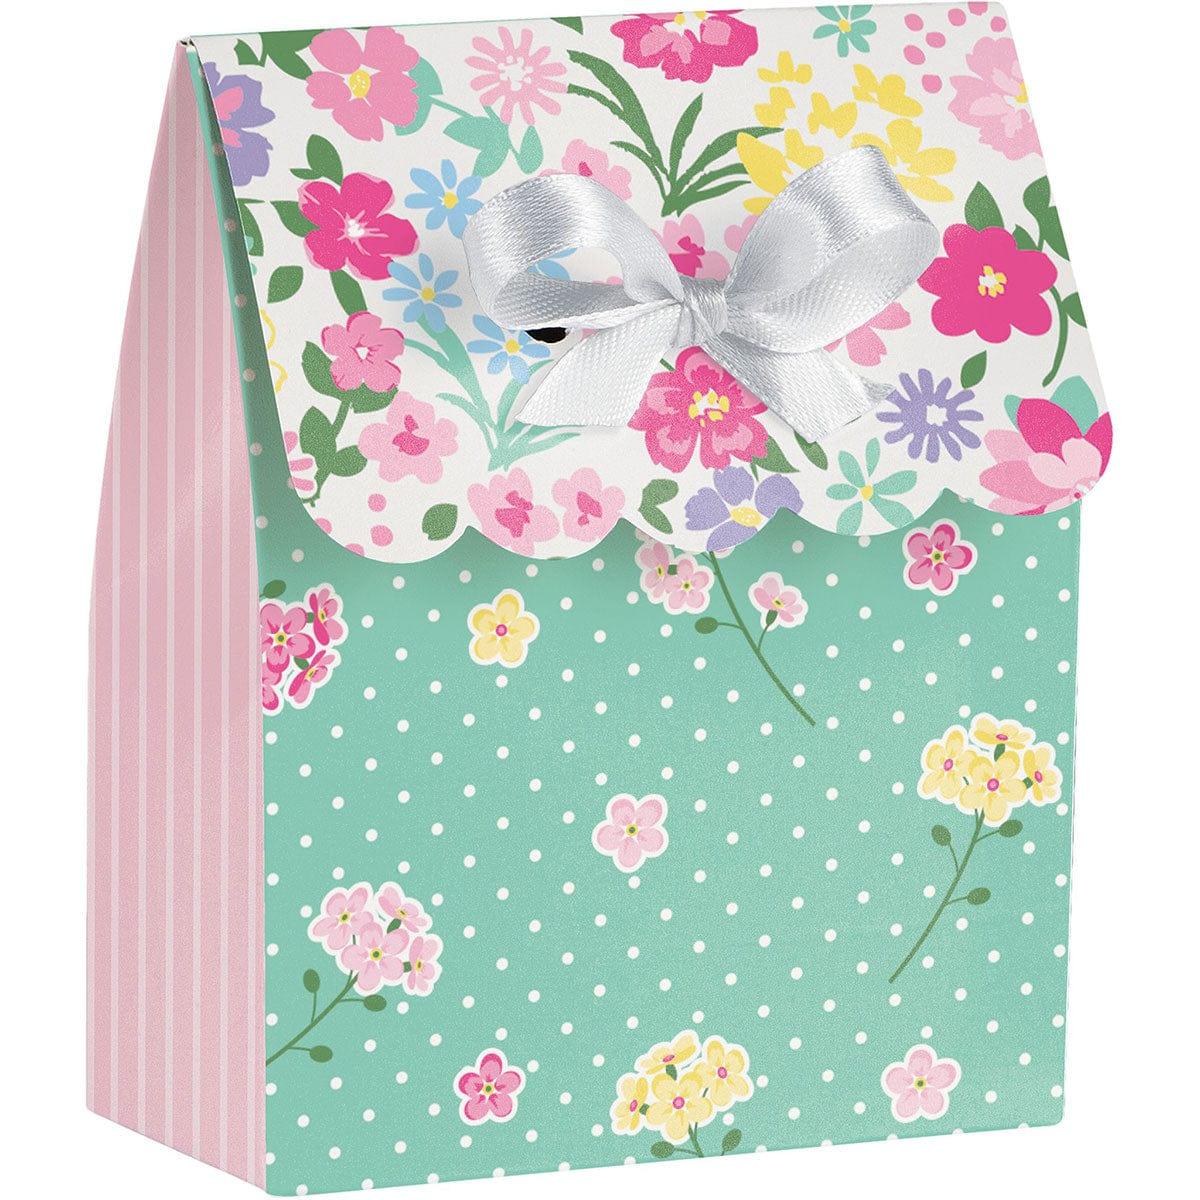 CREATIVE CONVERTING Kids Birthday Floral Tea Party Favour Bags, 12 Count